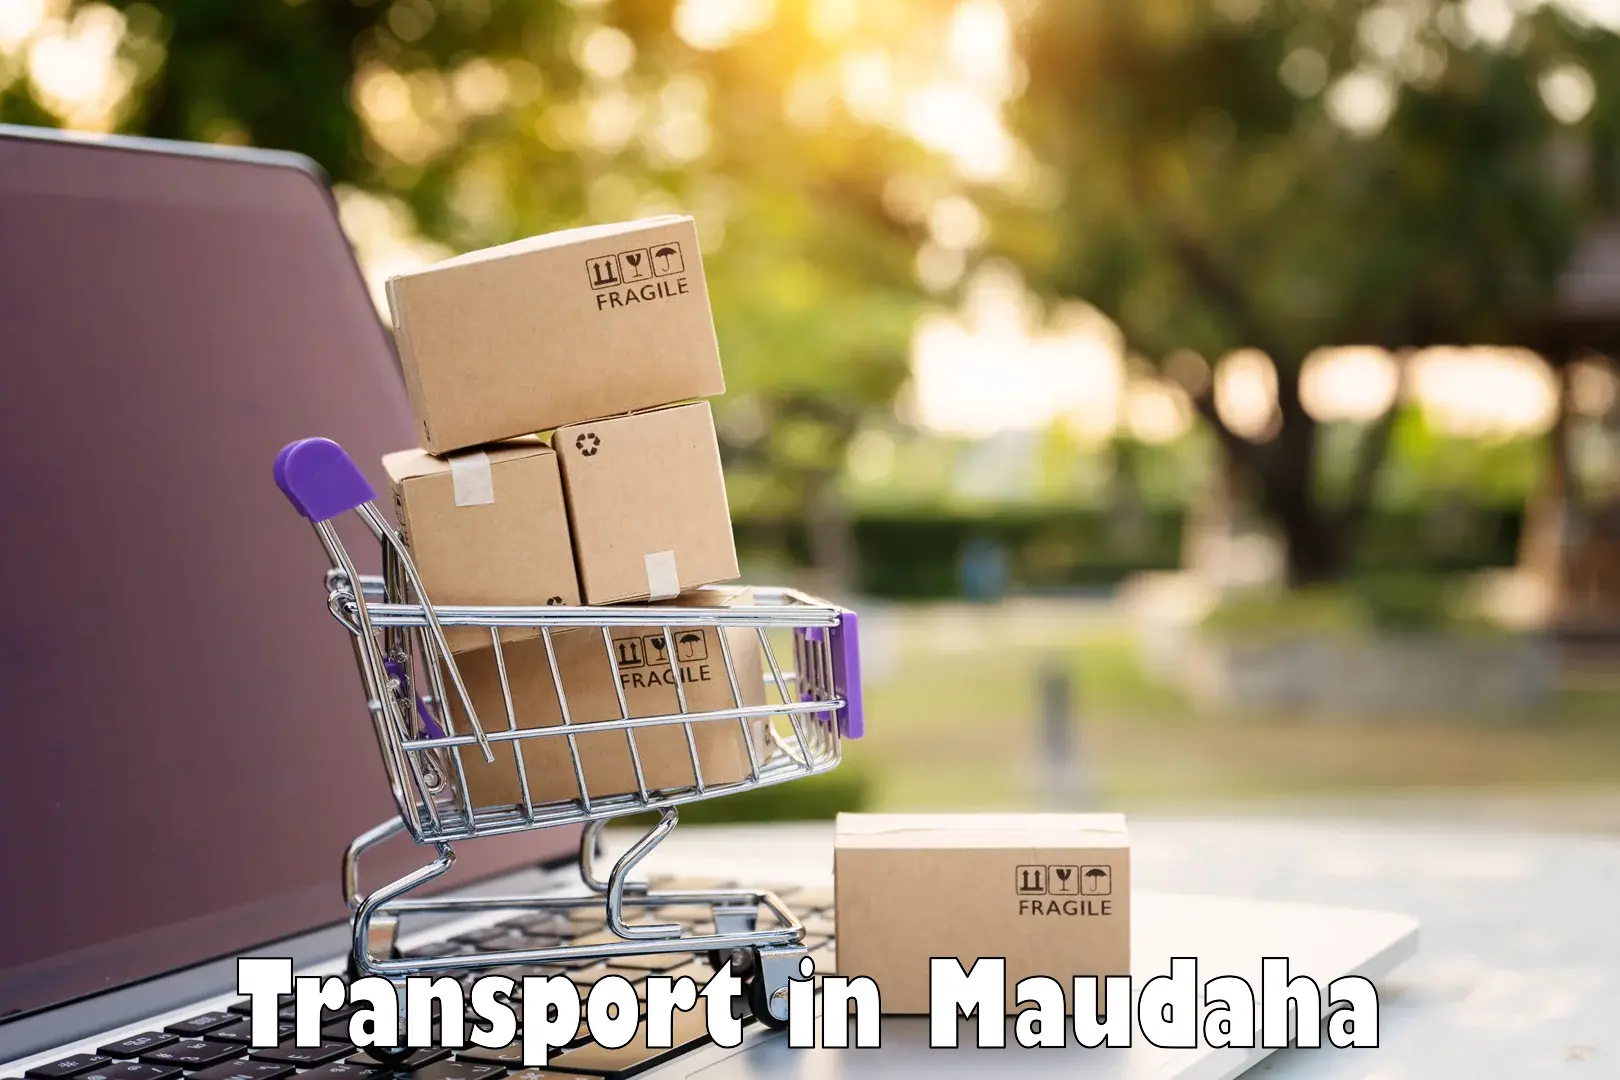 Transport services in Maudaha